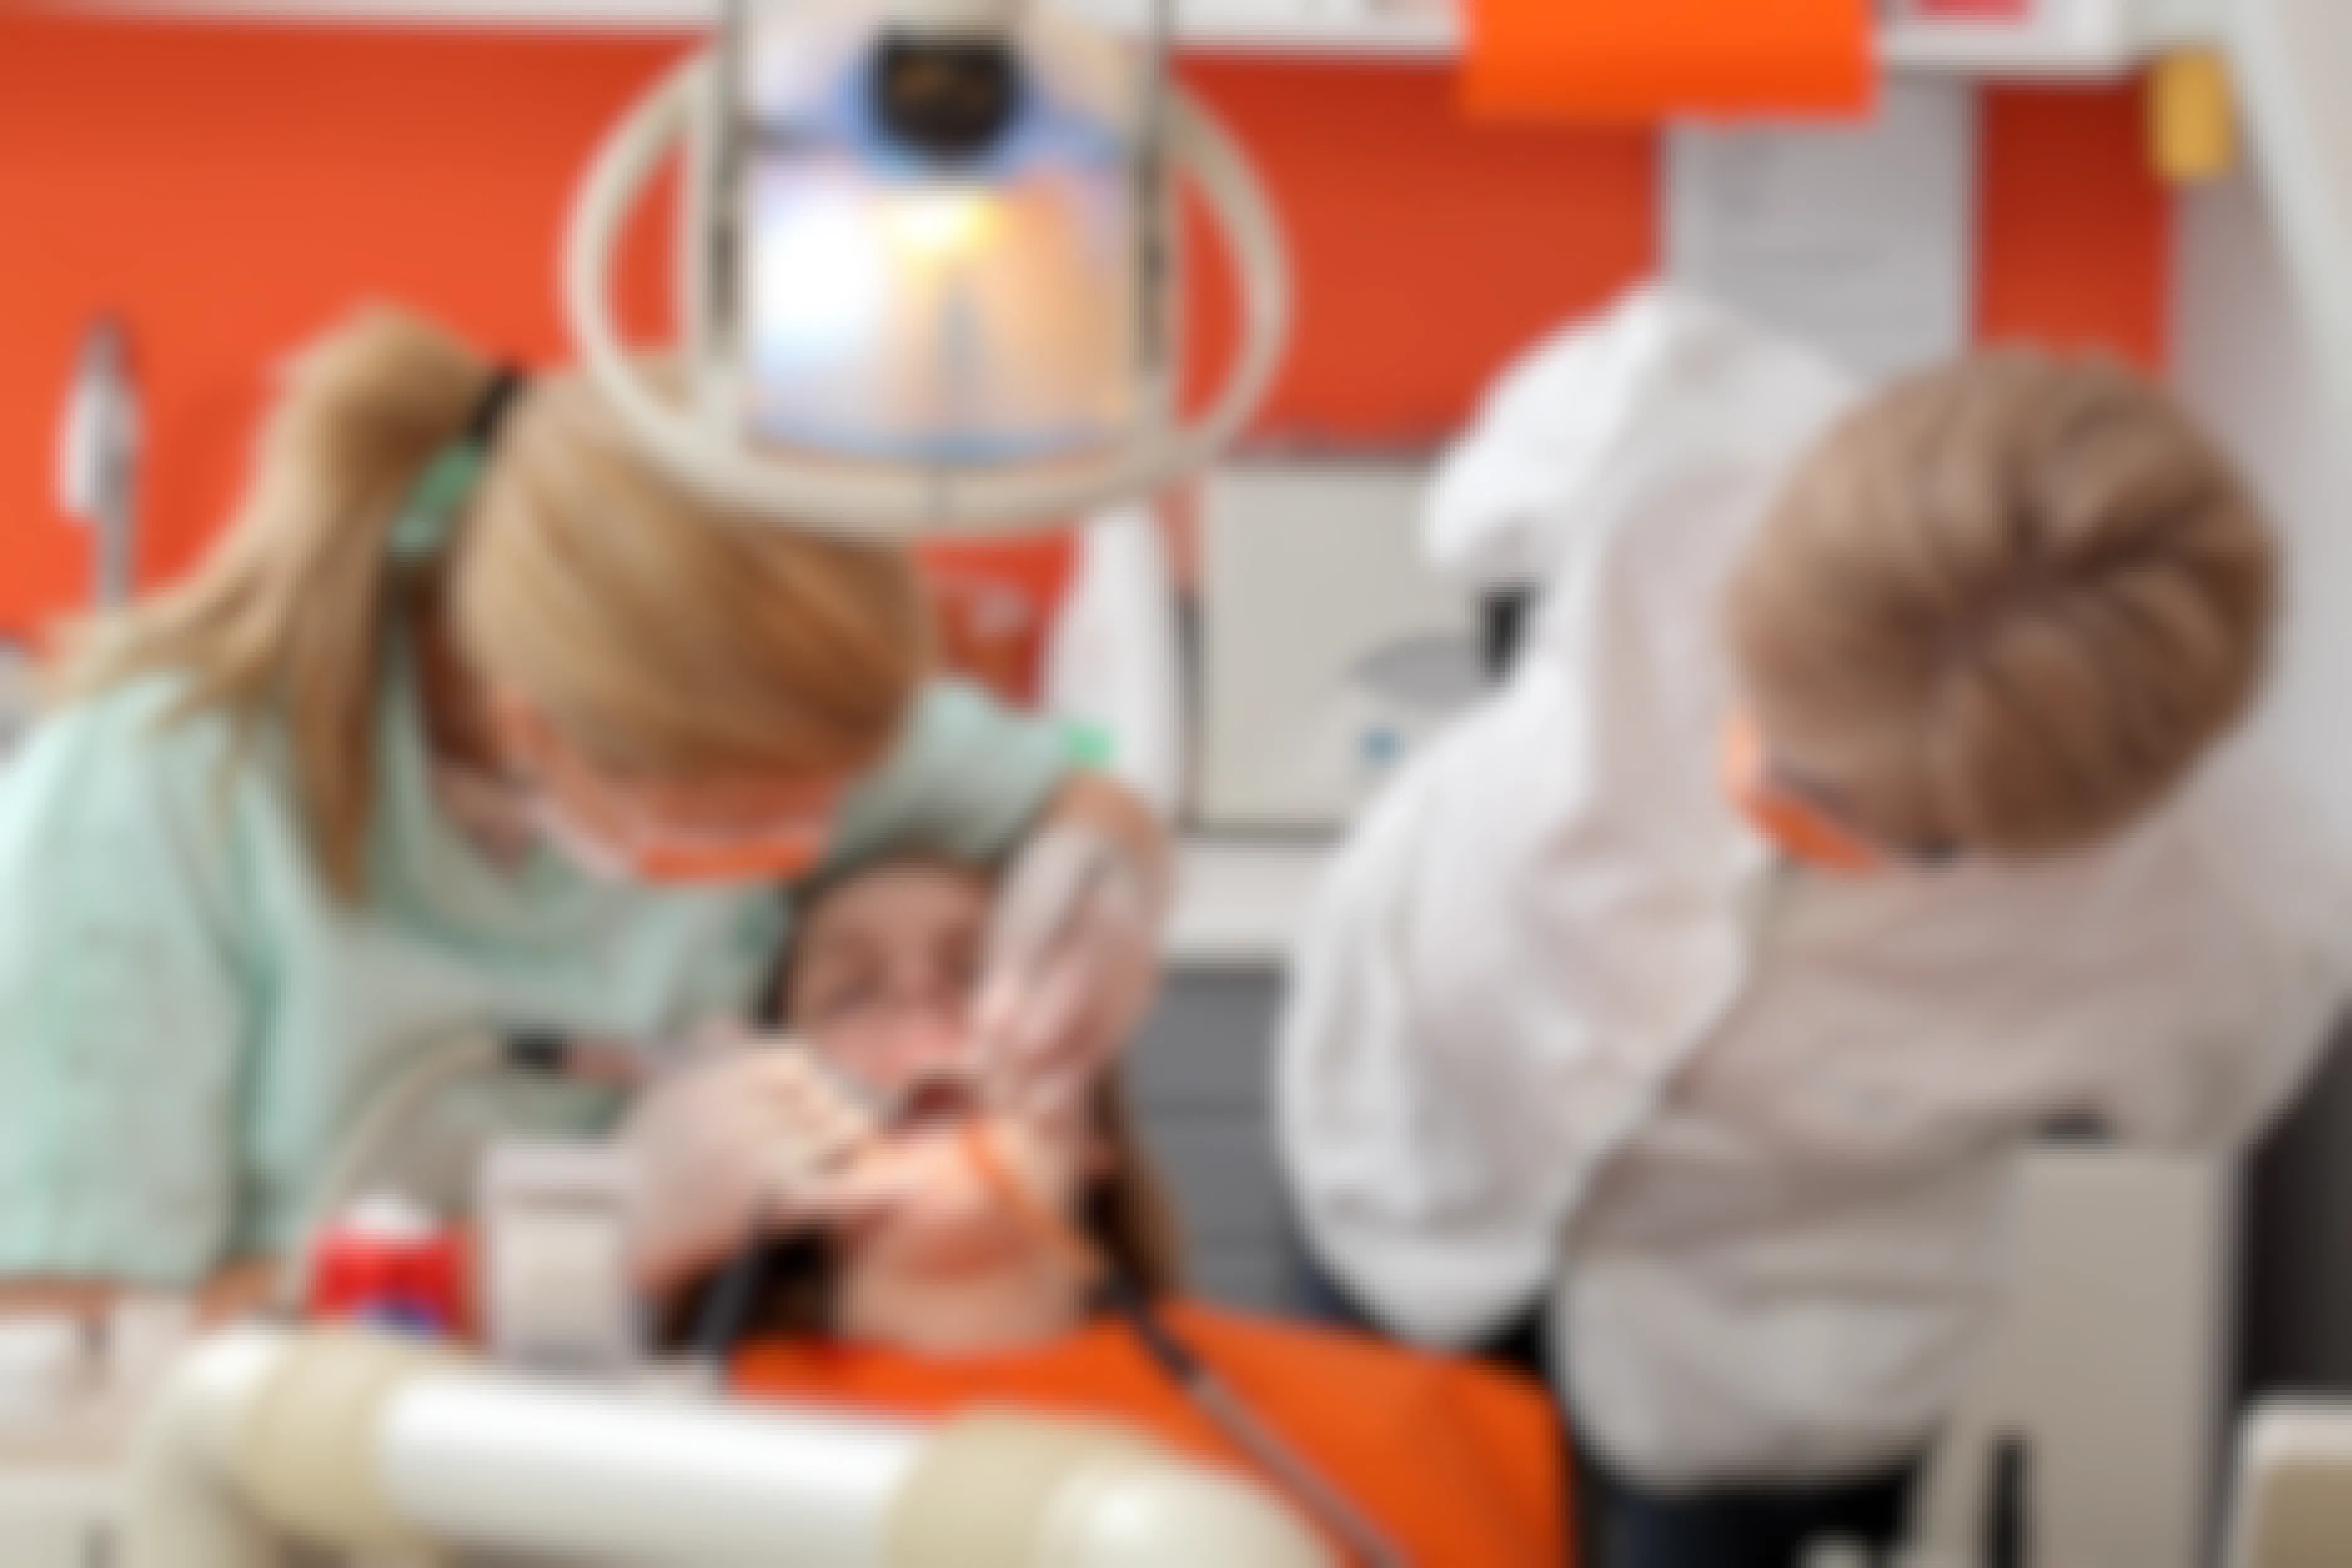 A dental school student doing a teeth cleaning under the supervision of an instructor